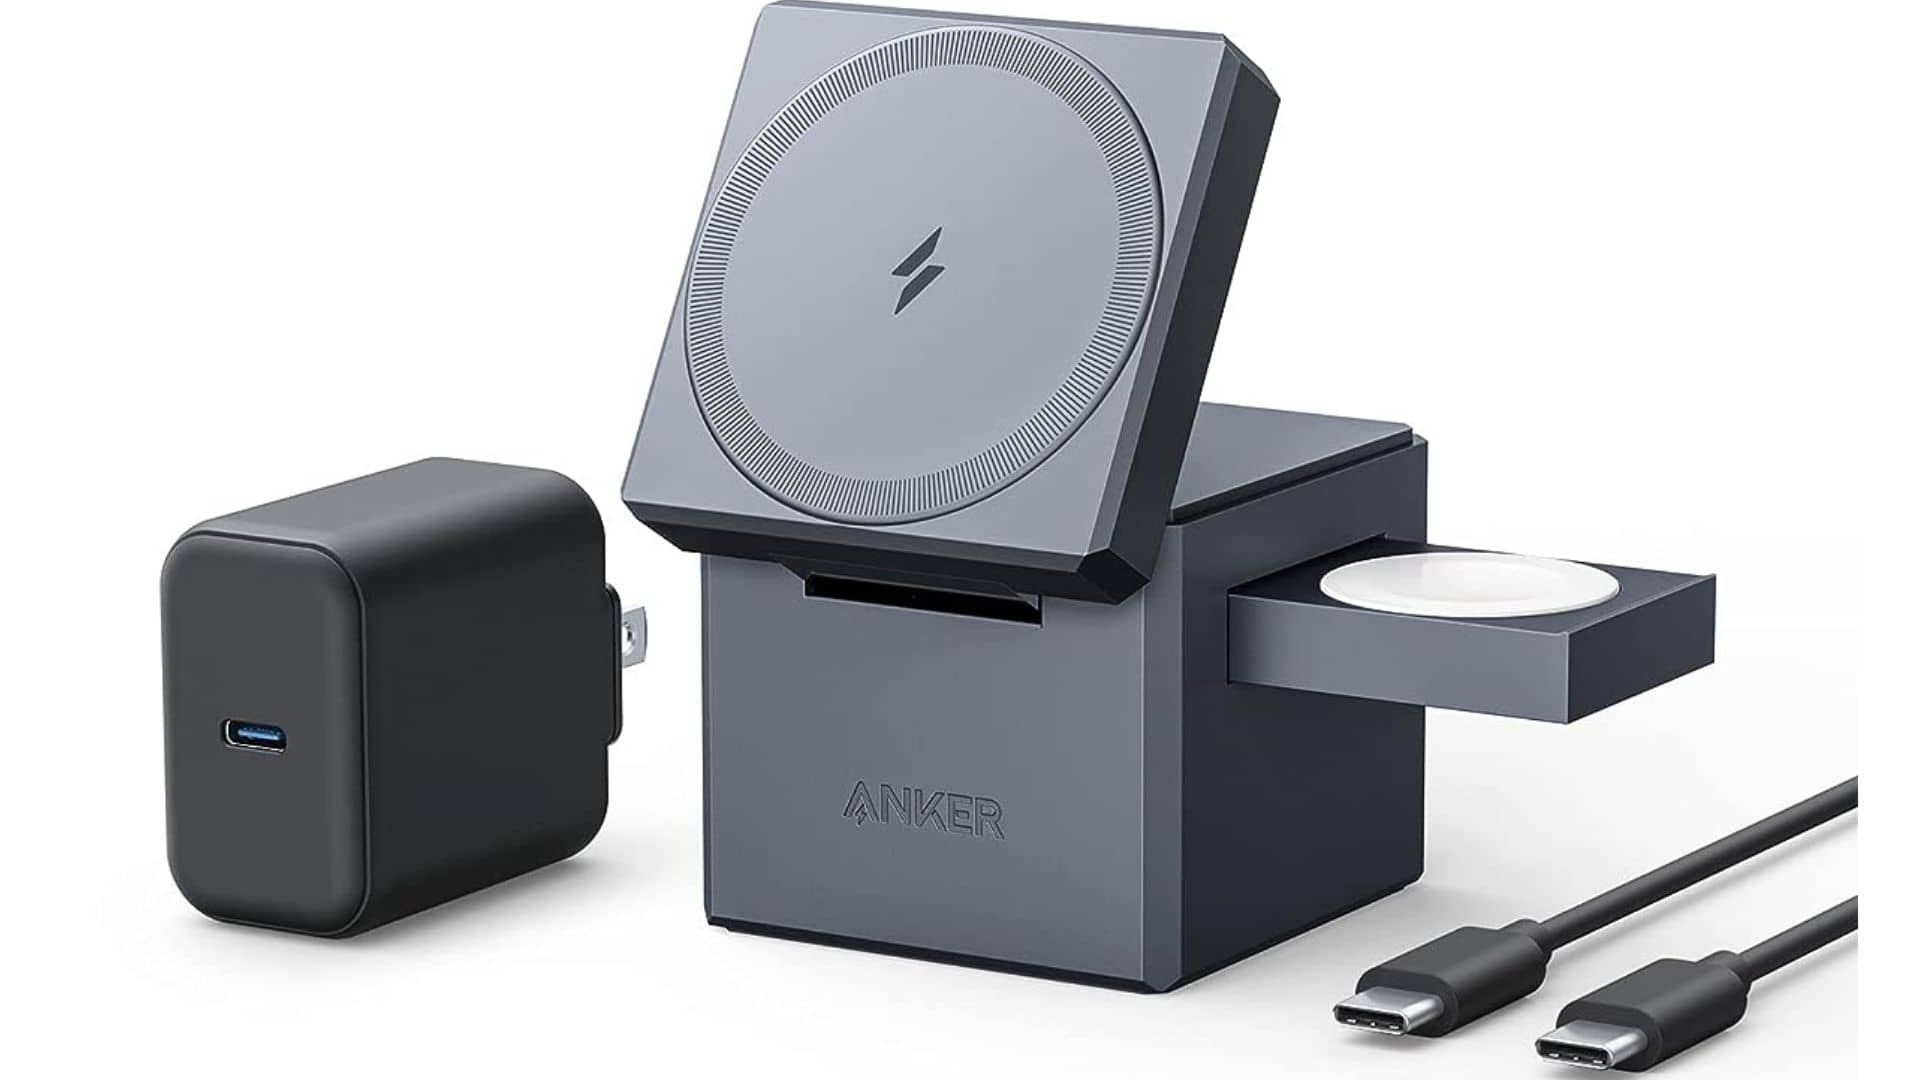 Anker 3-in-1 MagCube - The Magic Box of Chargers